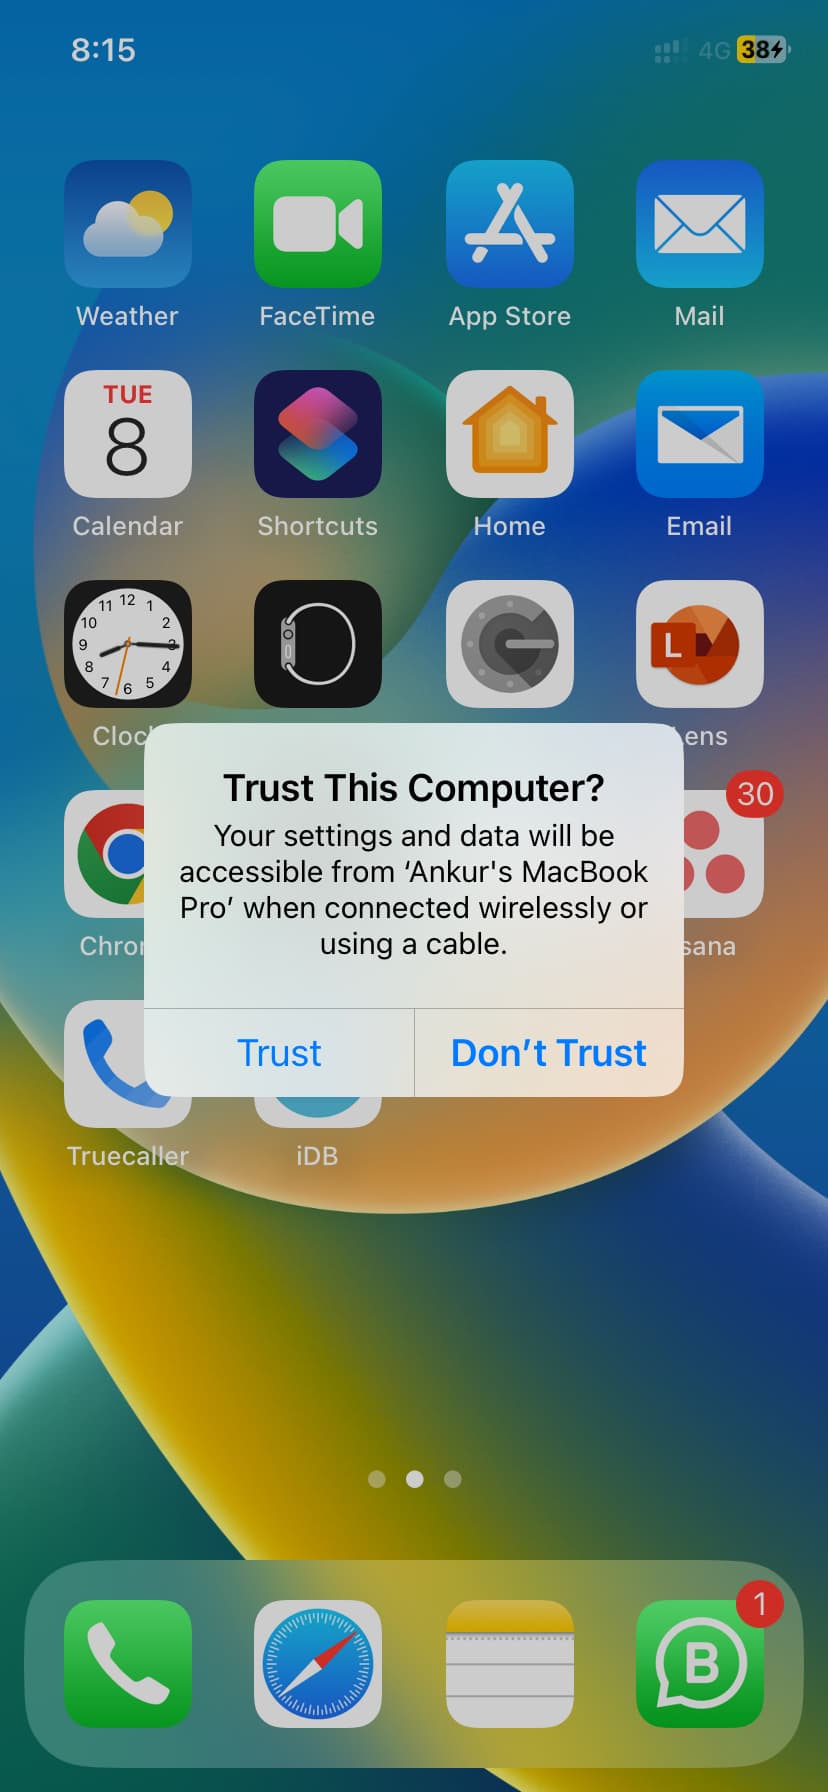 Trust This Computer alert on iPhone